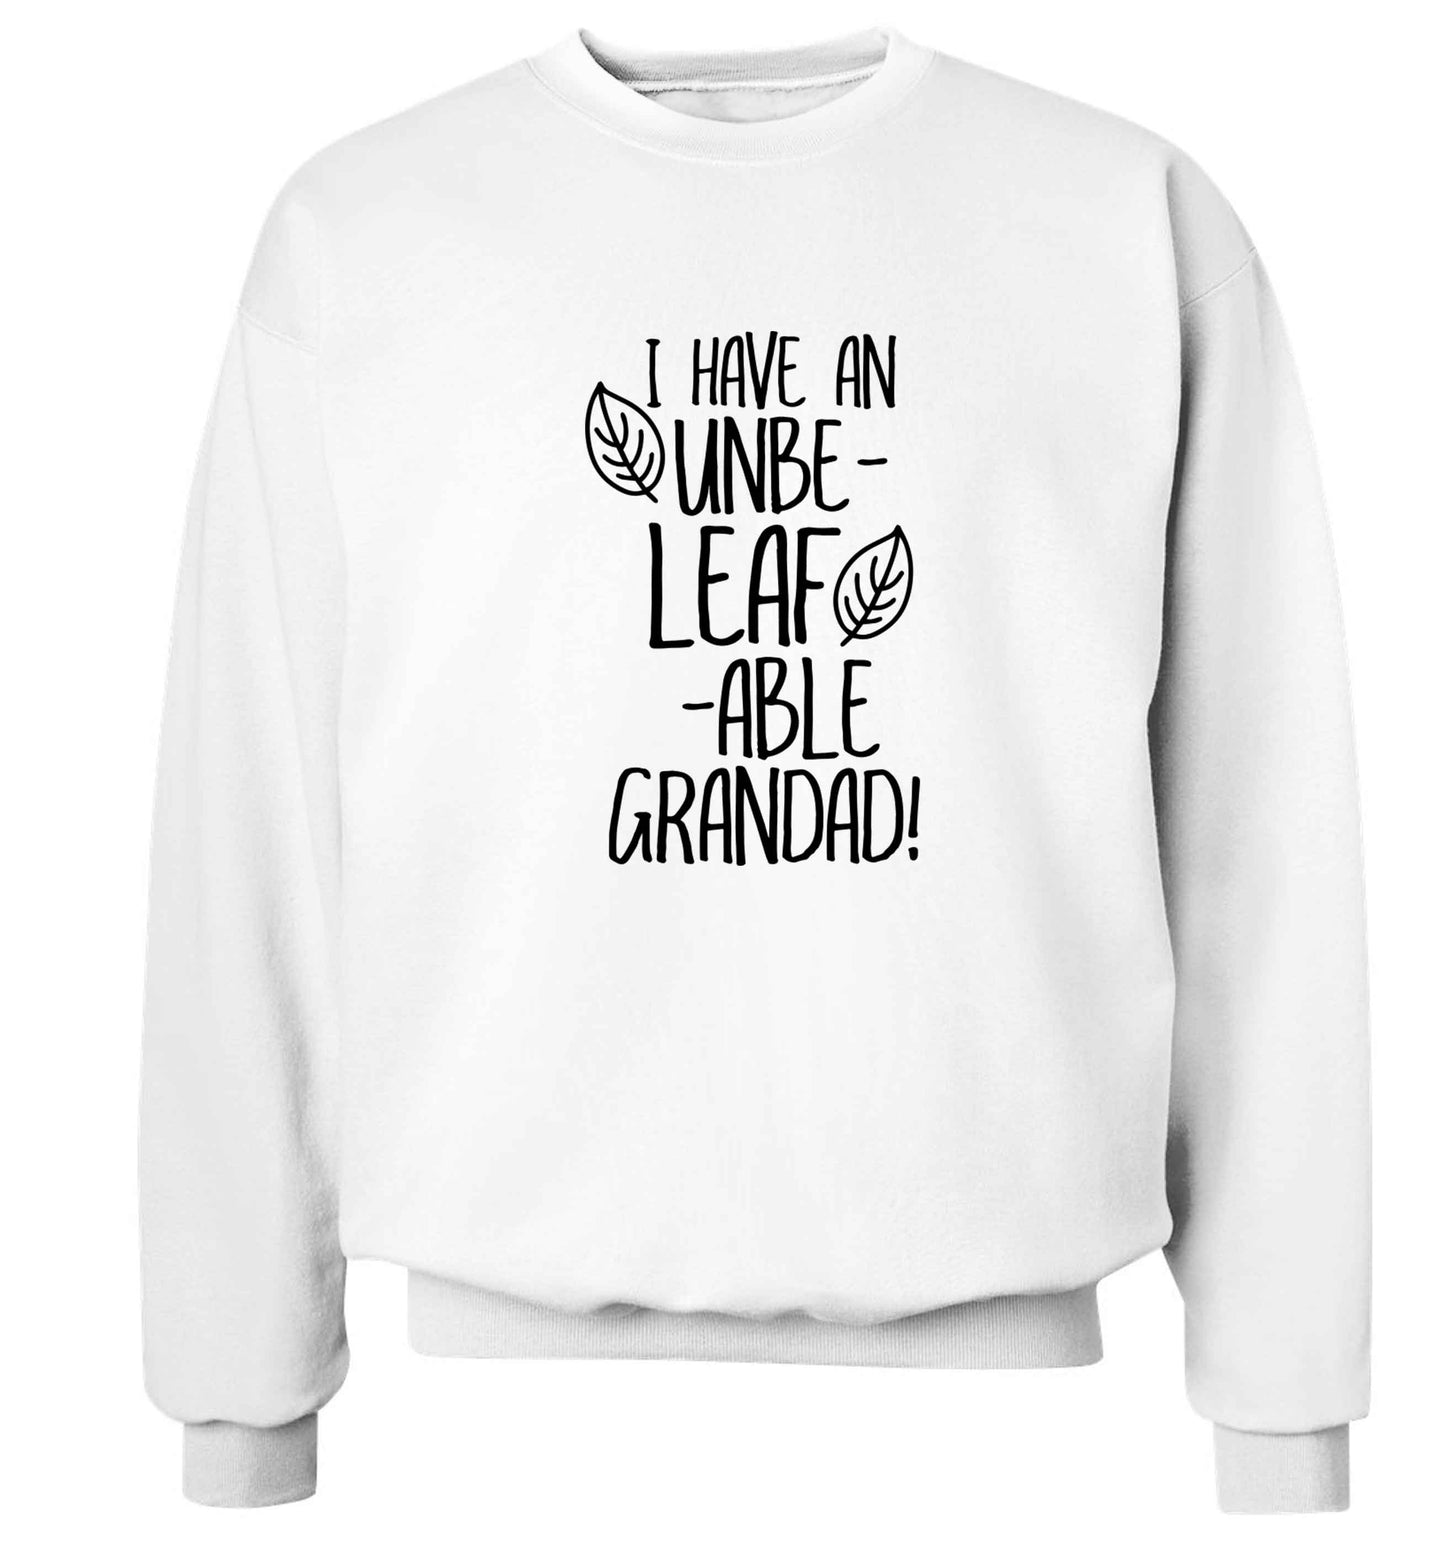 I have an unbe-leaf-able grandad Adult's unisex white Sweater 2XL